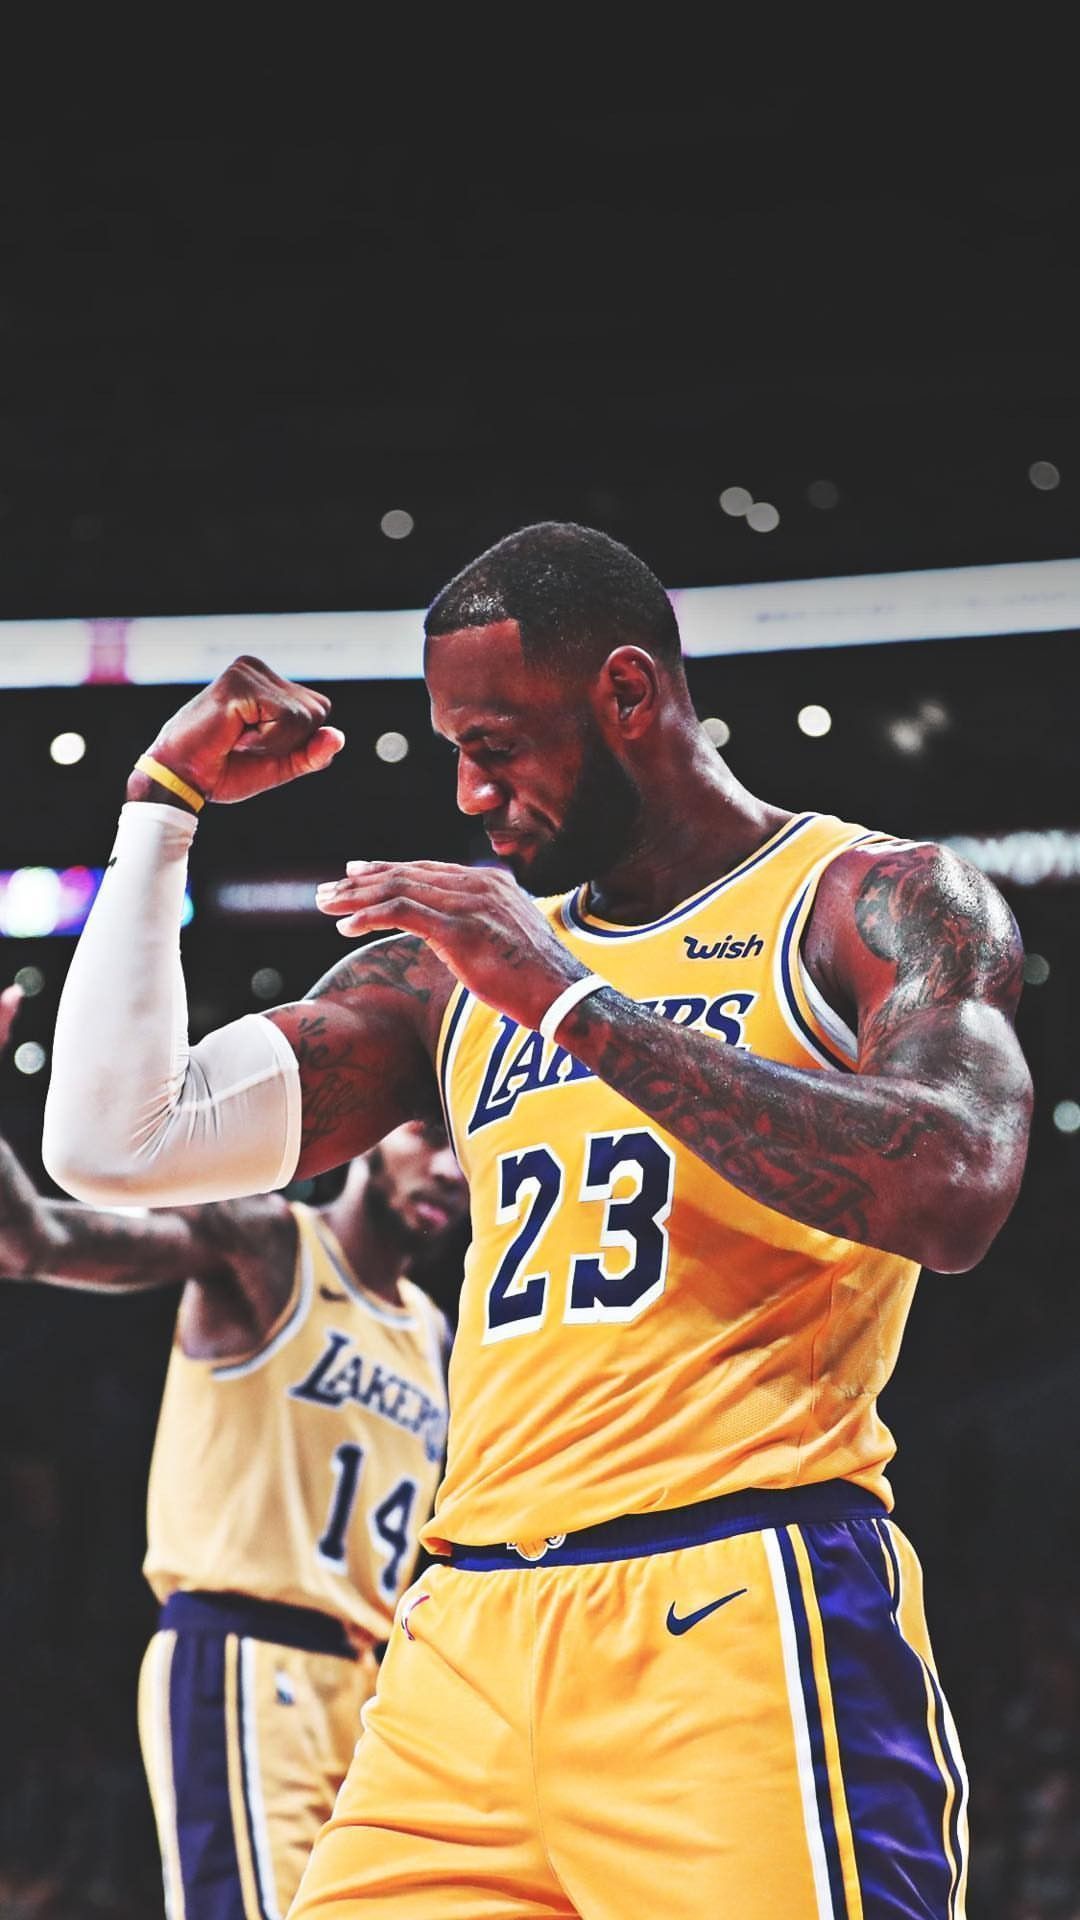 Lebron James Lakers Wallpaper iPhone with high-resolution 1080x1920 pixel. You can use this wallpaper for your iPhone 5, 6, 7, 8, X, XS, XR backgrounds, Mobile Screensaver, or iPad Lock Screen - Lebron James